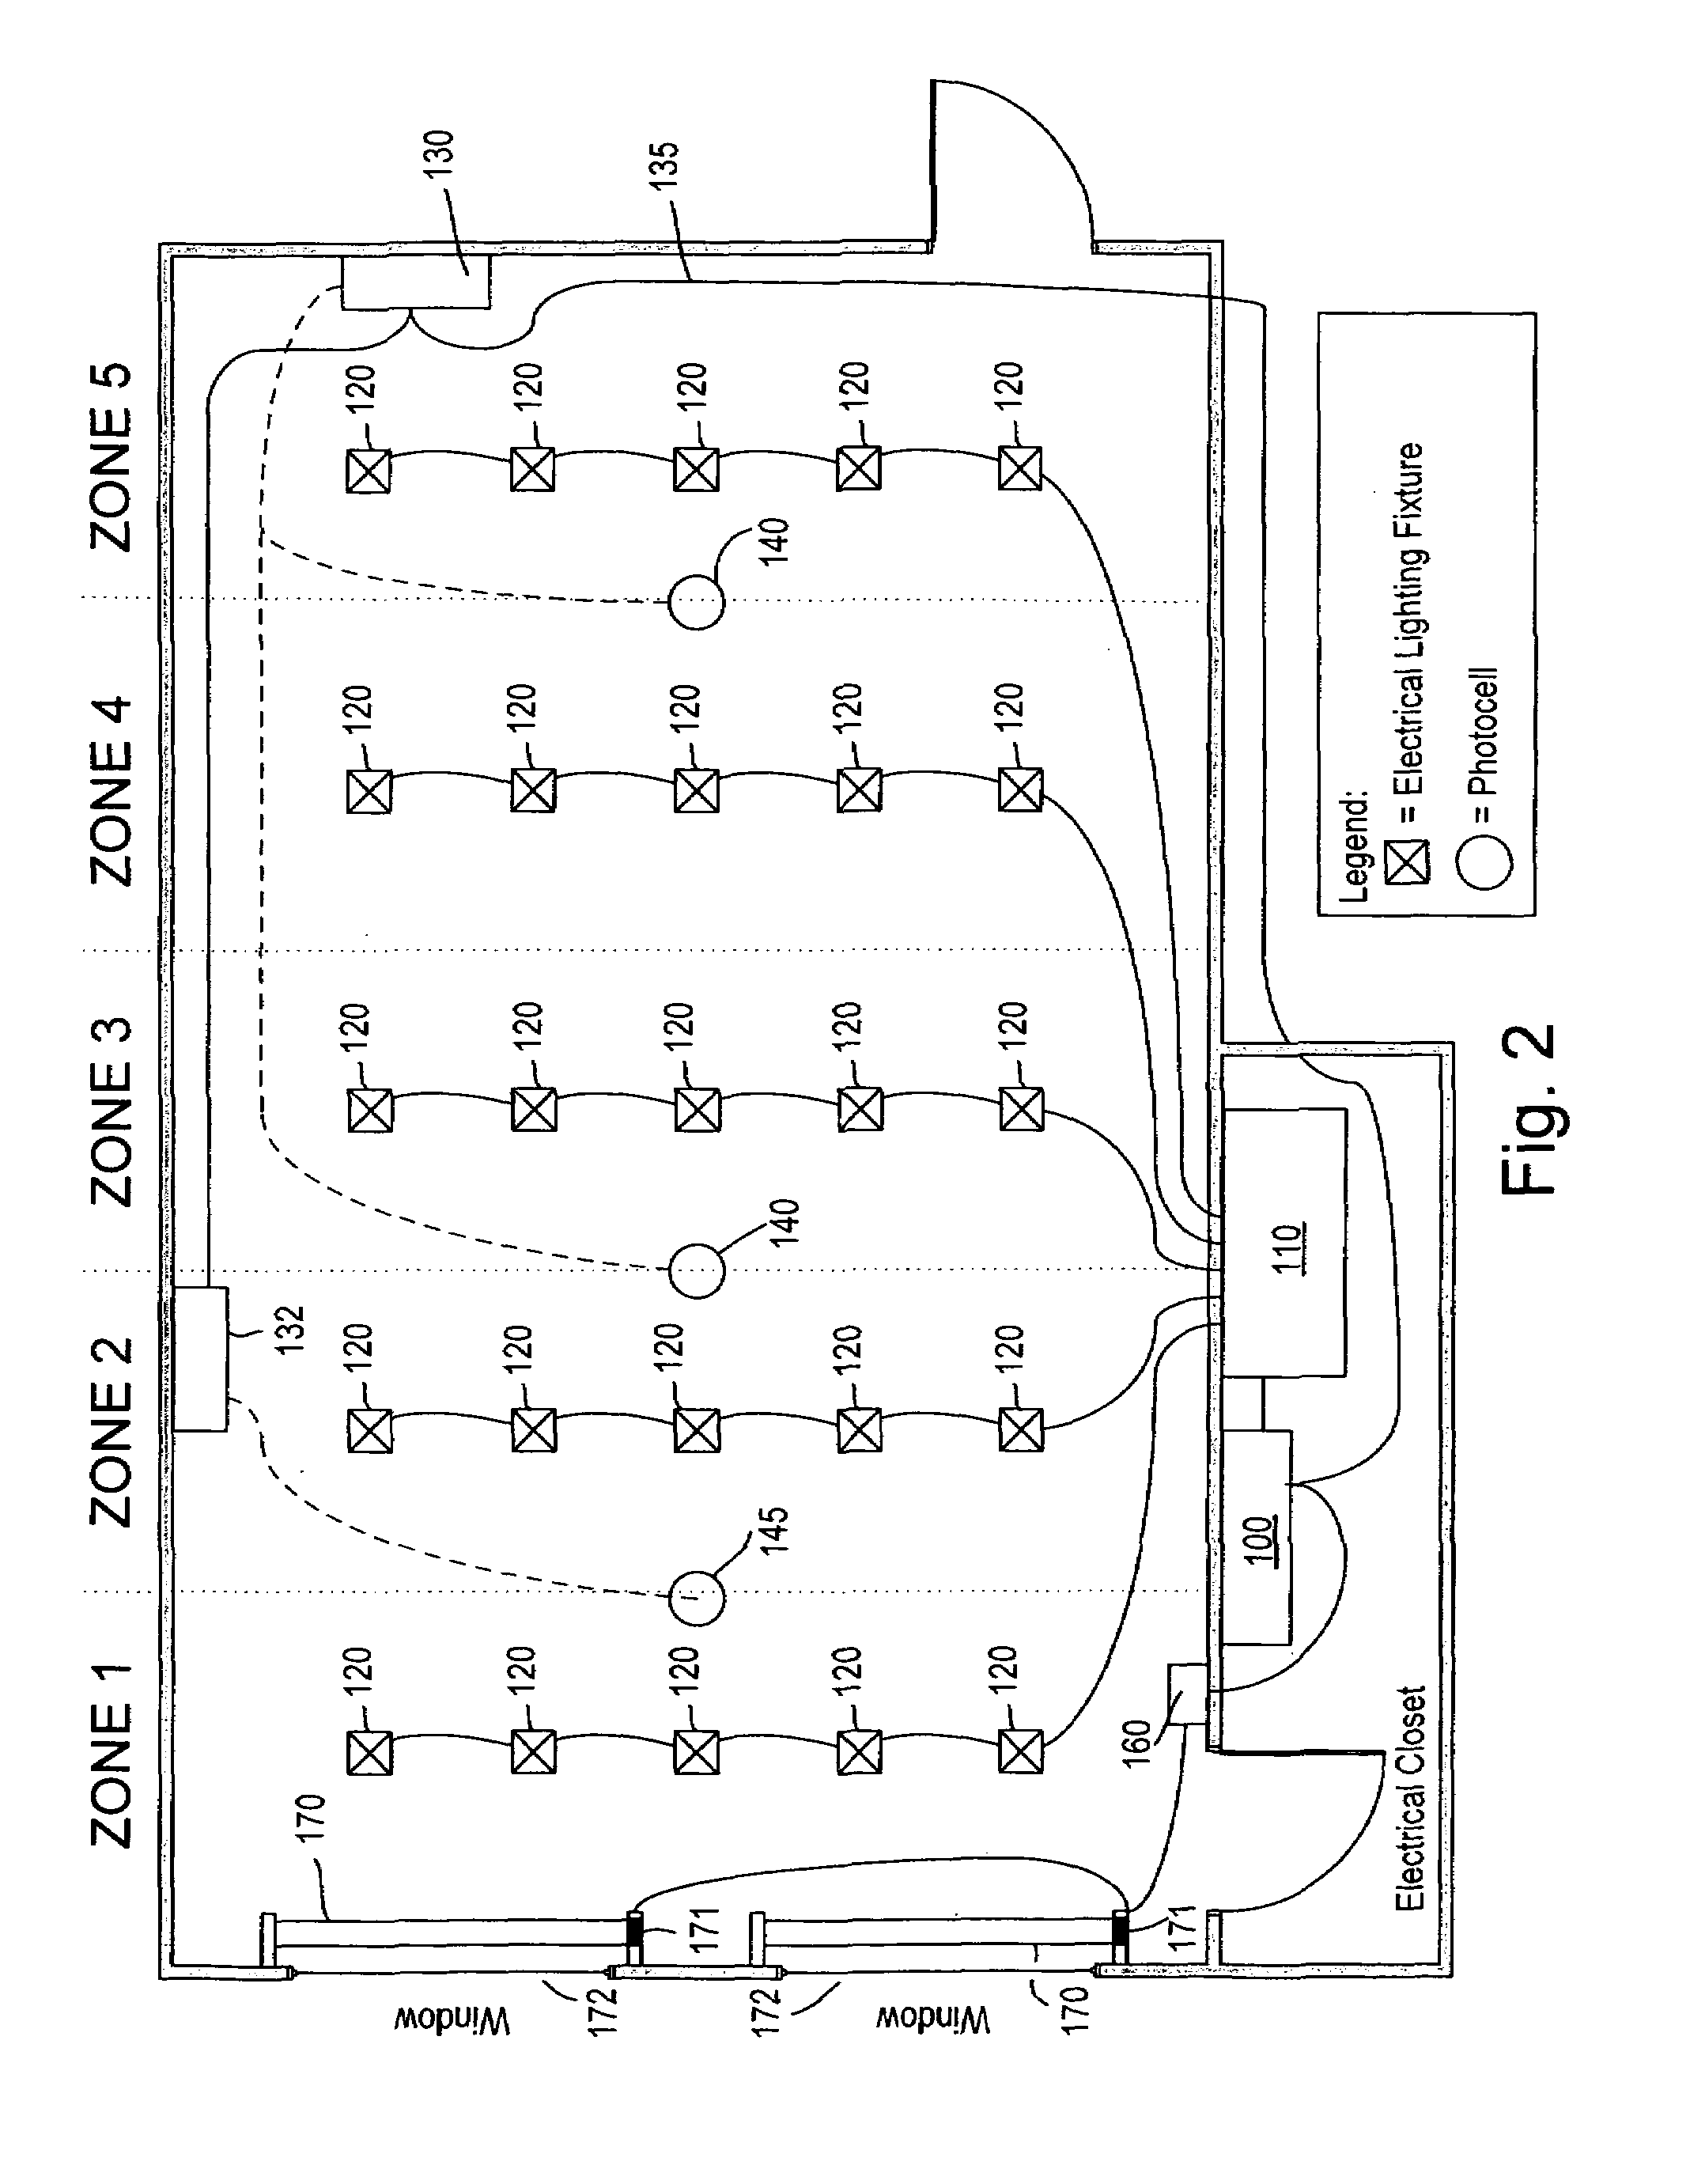 System to control daylight and artificial illumination and sun glare in a space